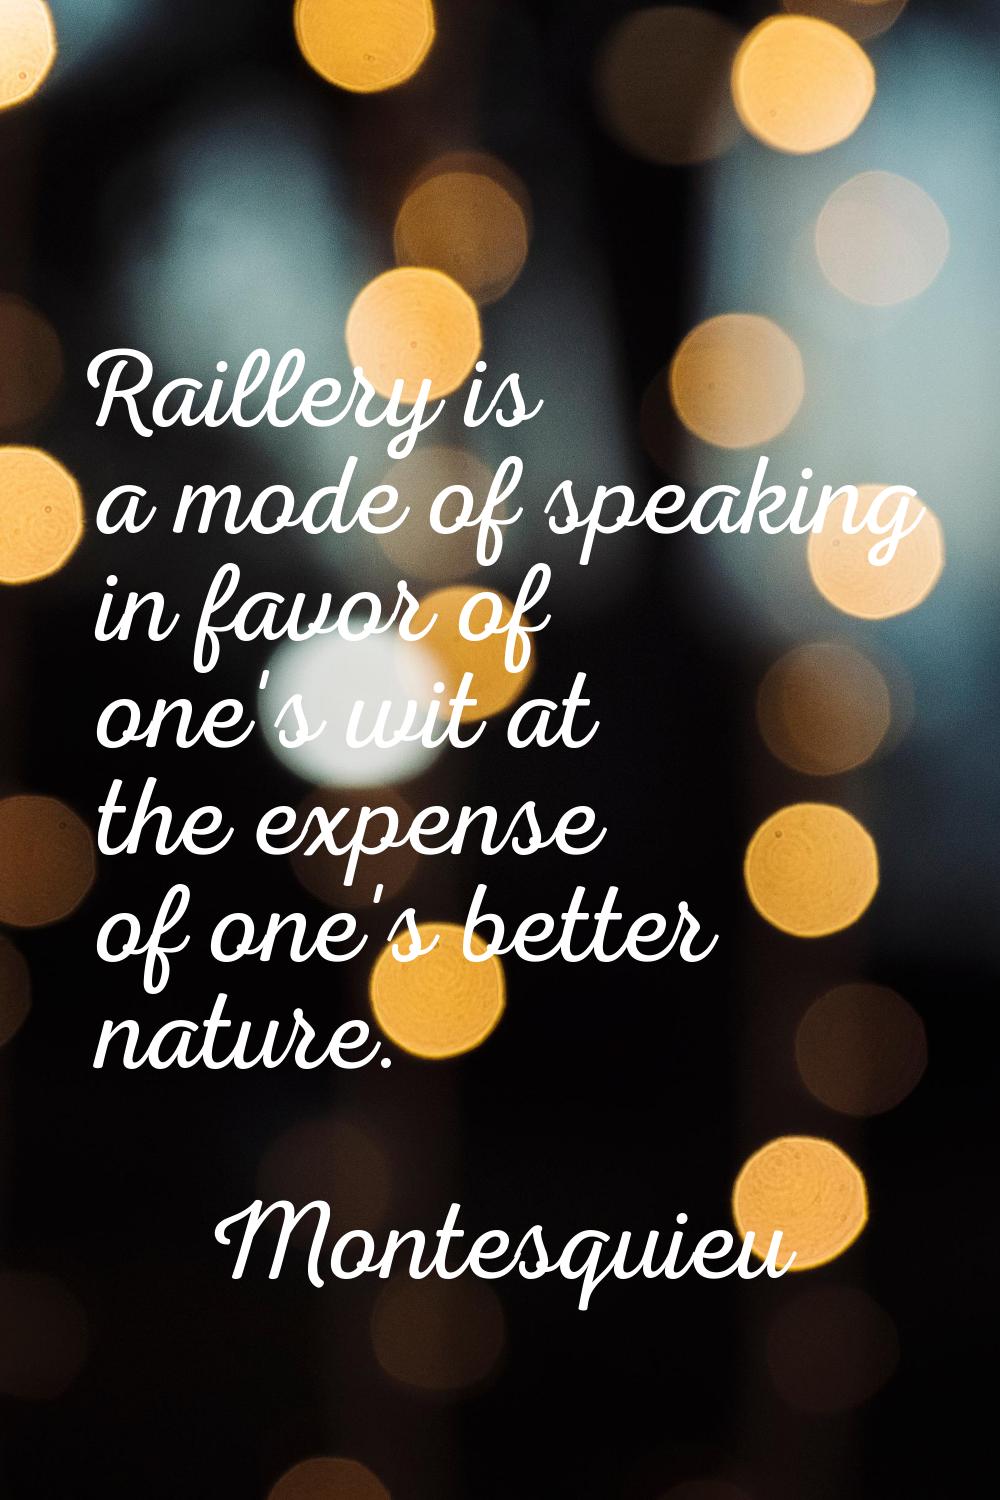 Raillery is a mode of speaking in favor of one's wit at the expense of one's better nature.